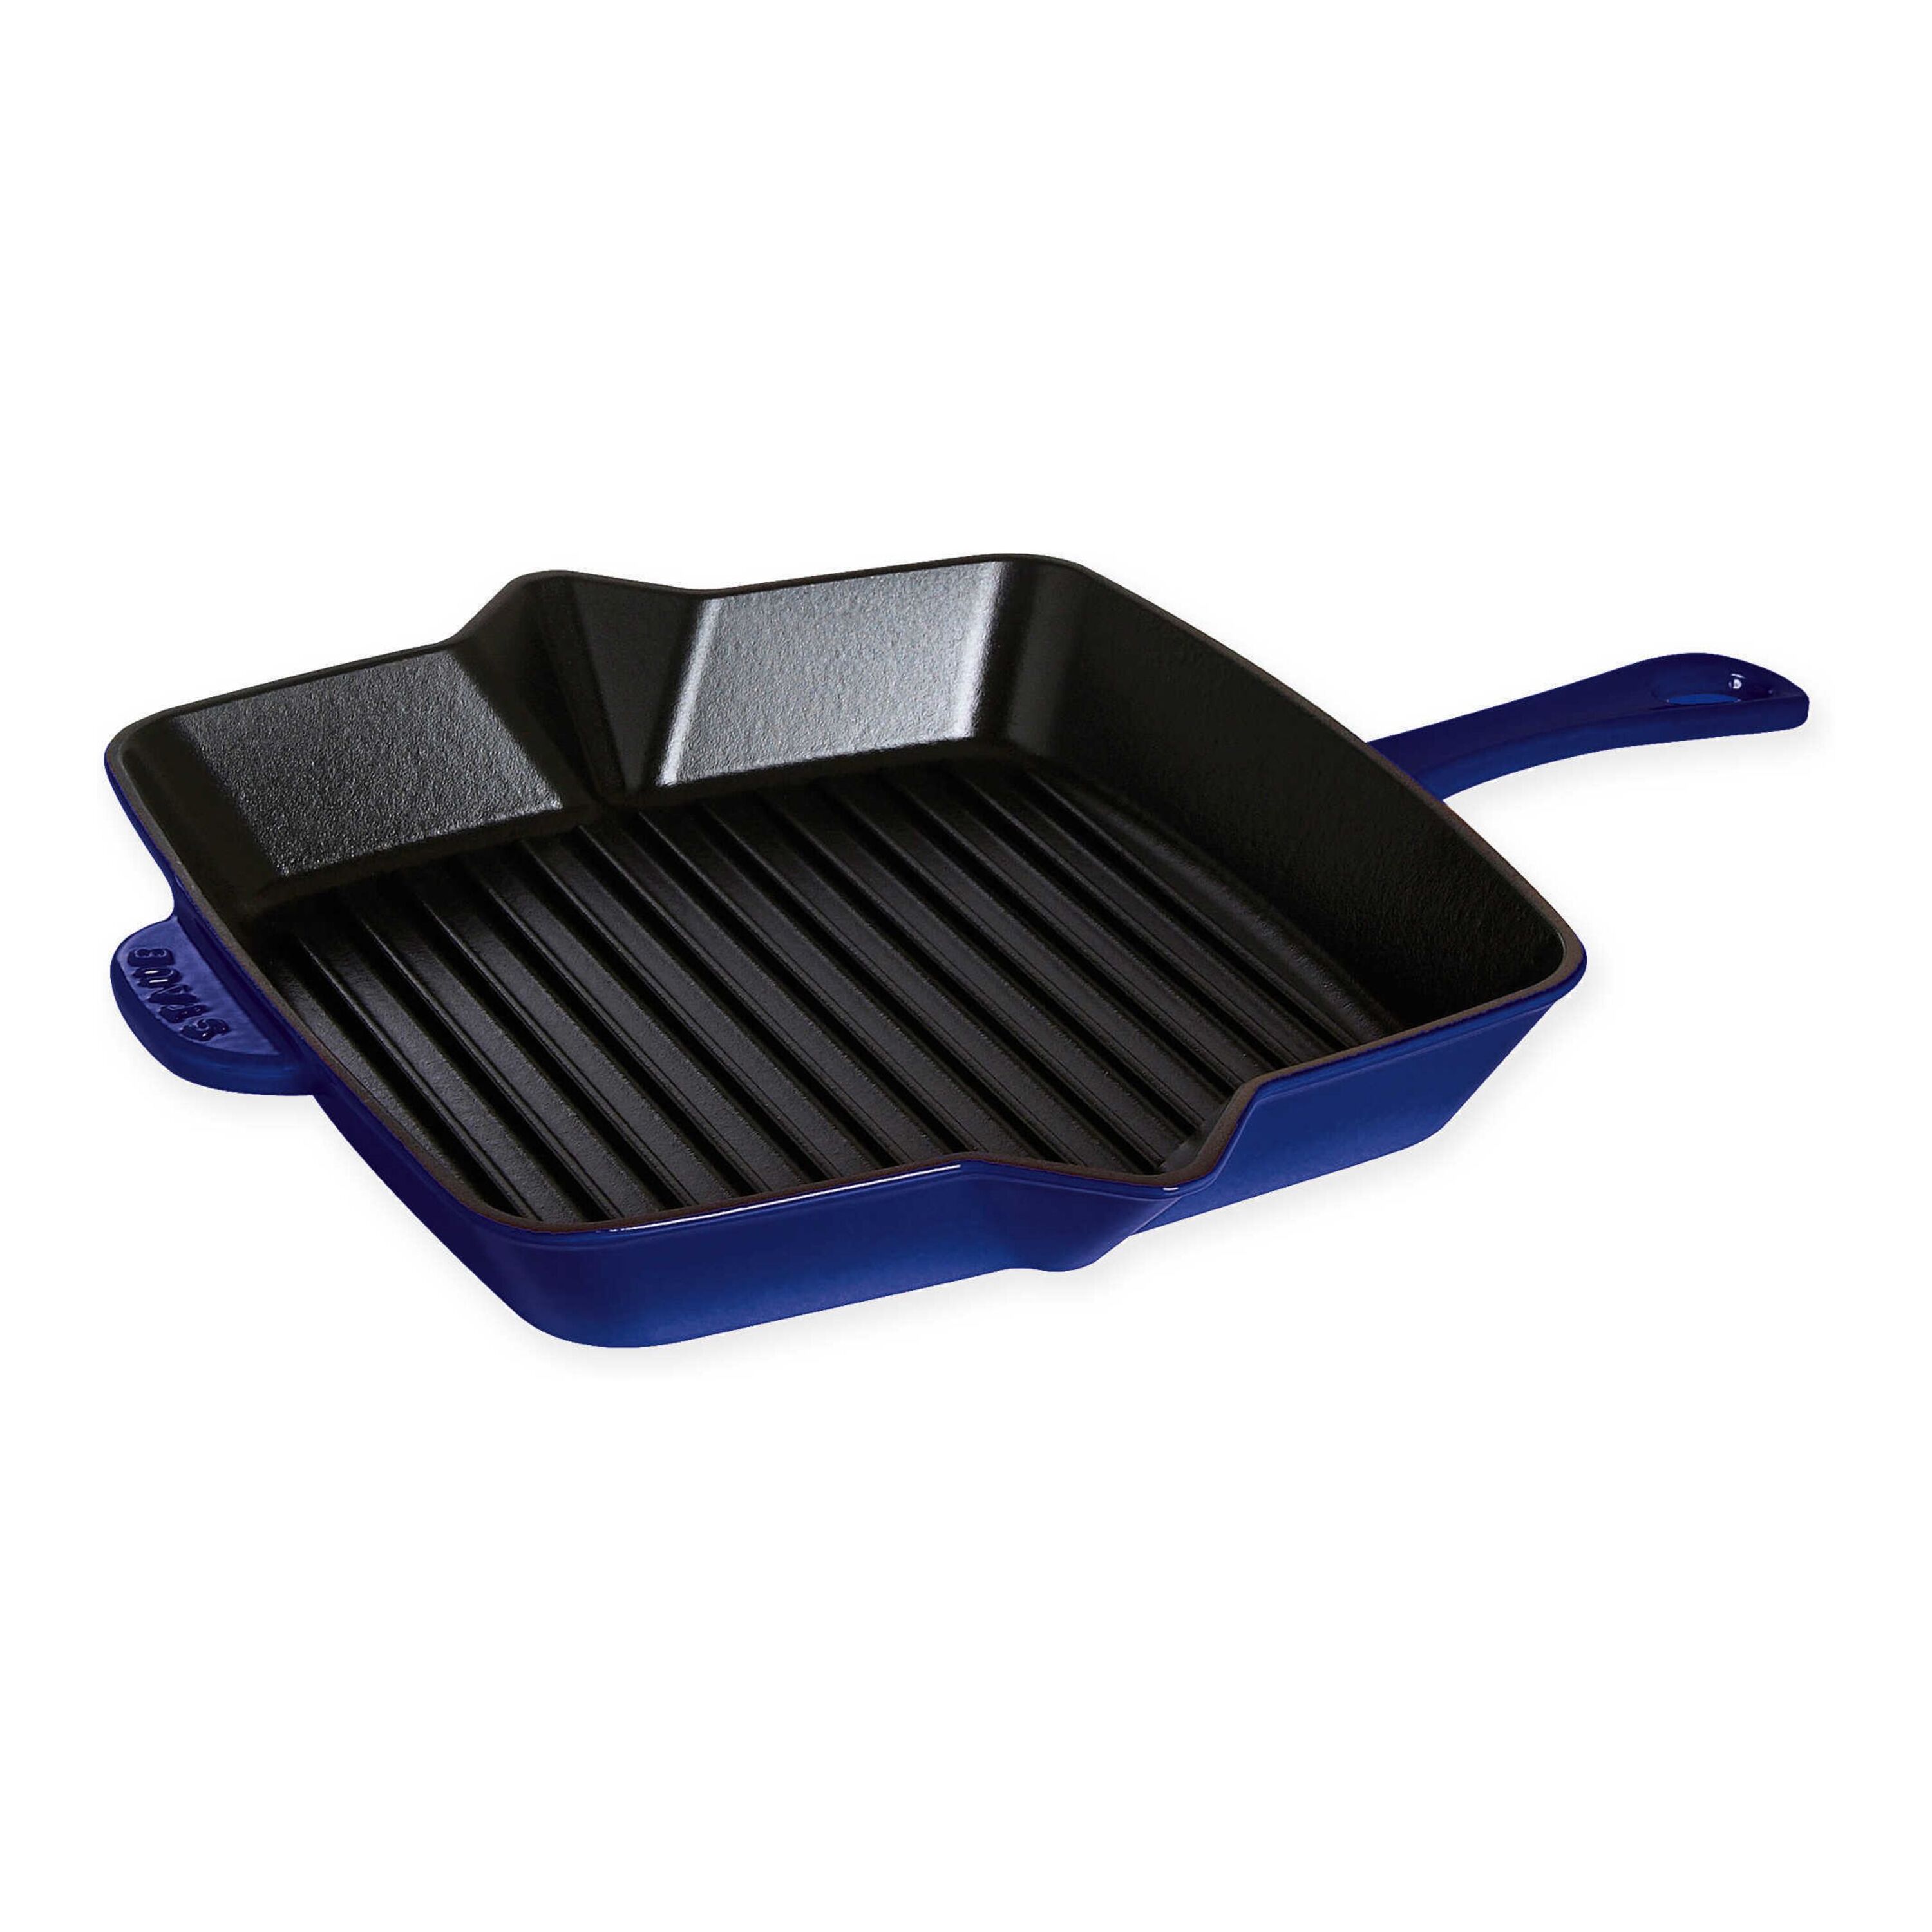 Shoppers Call This Lodge Pan 'the Ultimate Steak Pan,' and  Just  Slashed Its Price